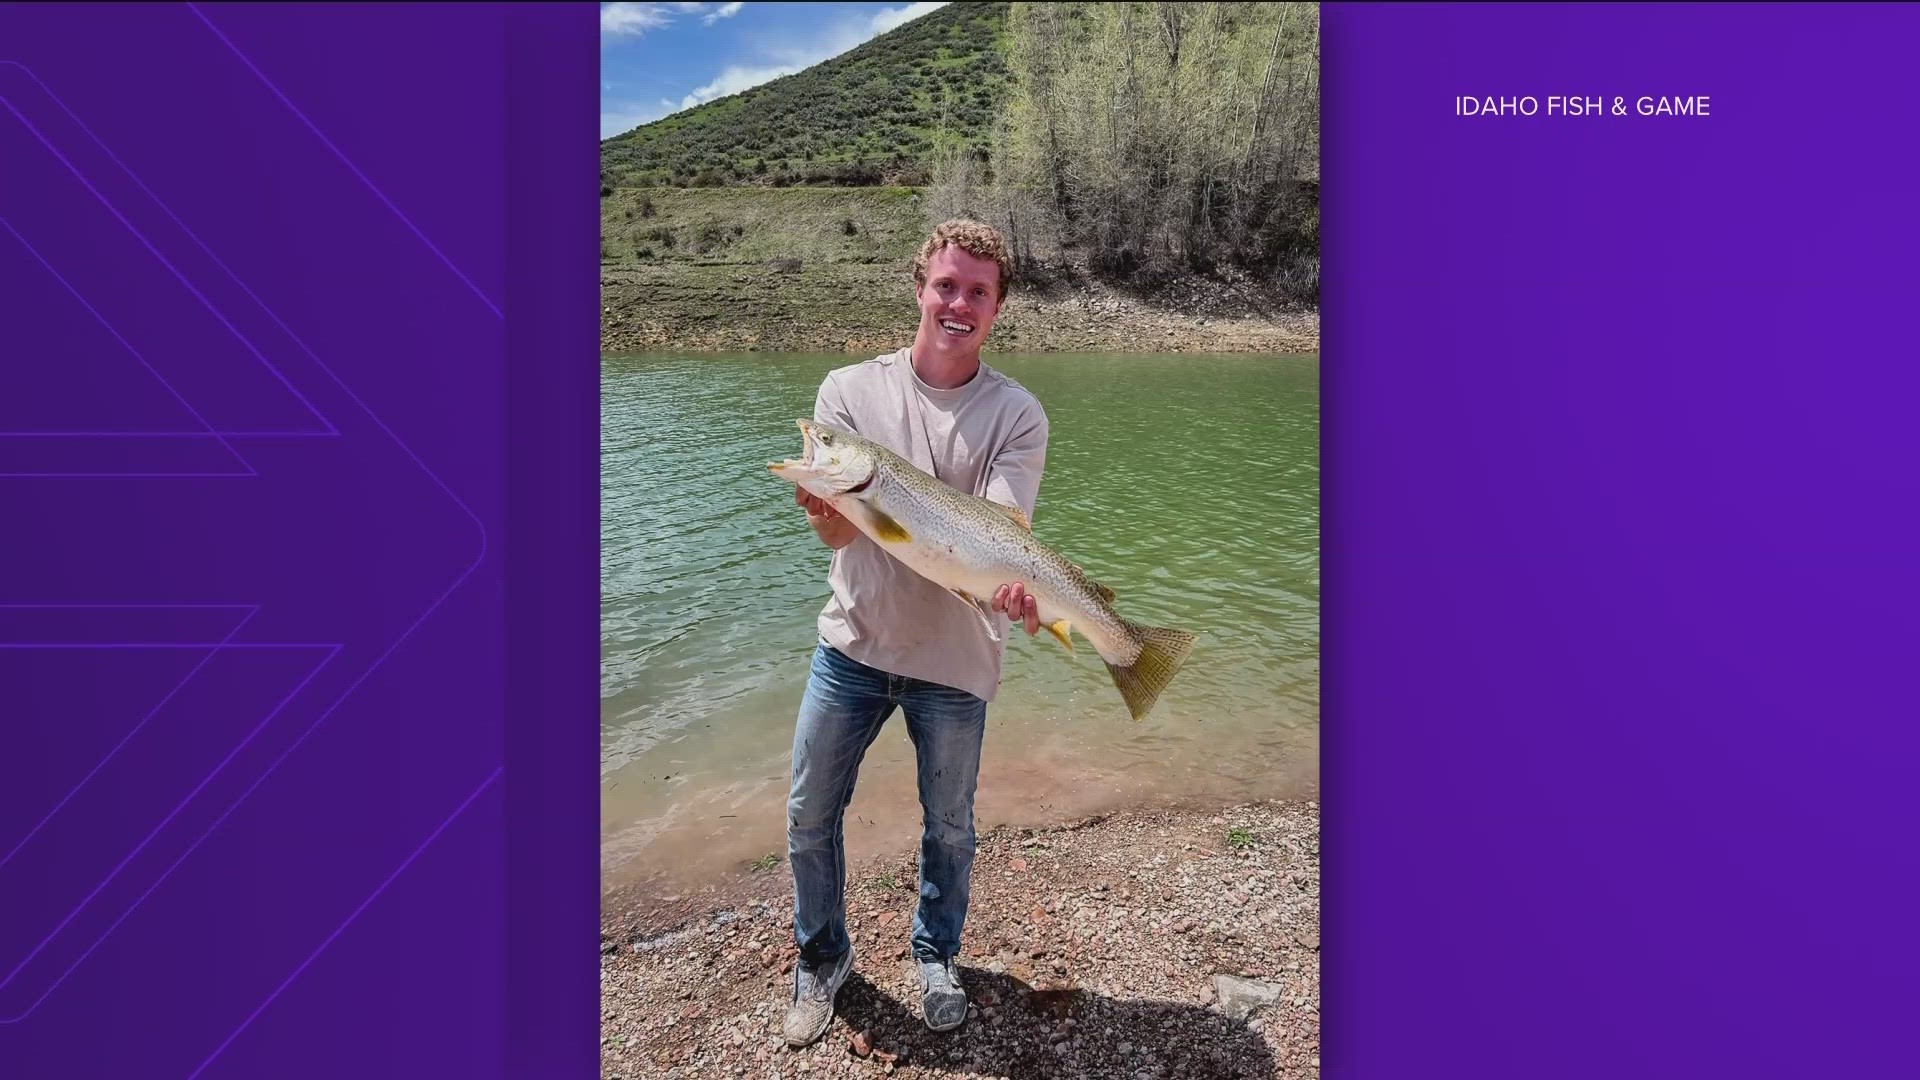 Kody King reeled in the 29-inch, 8.47-pound fish in Montpelier Reservoir.